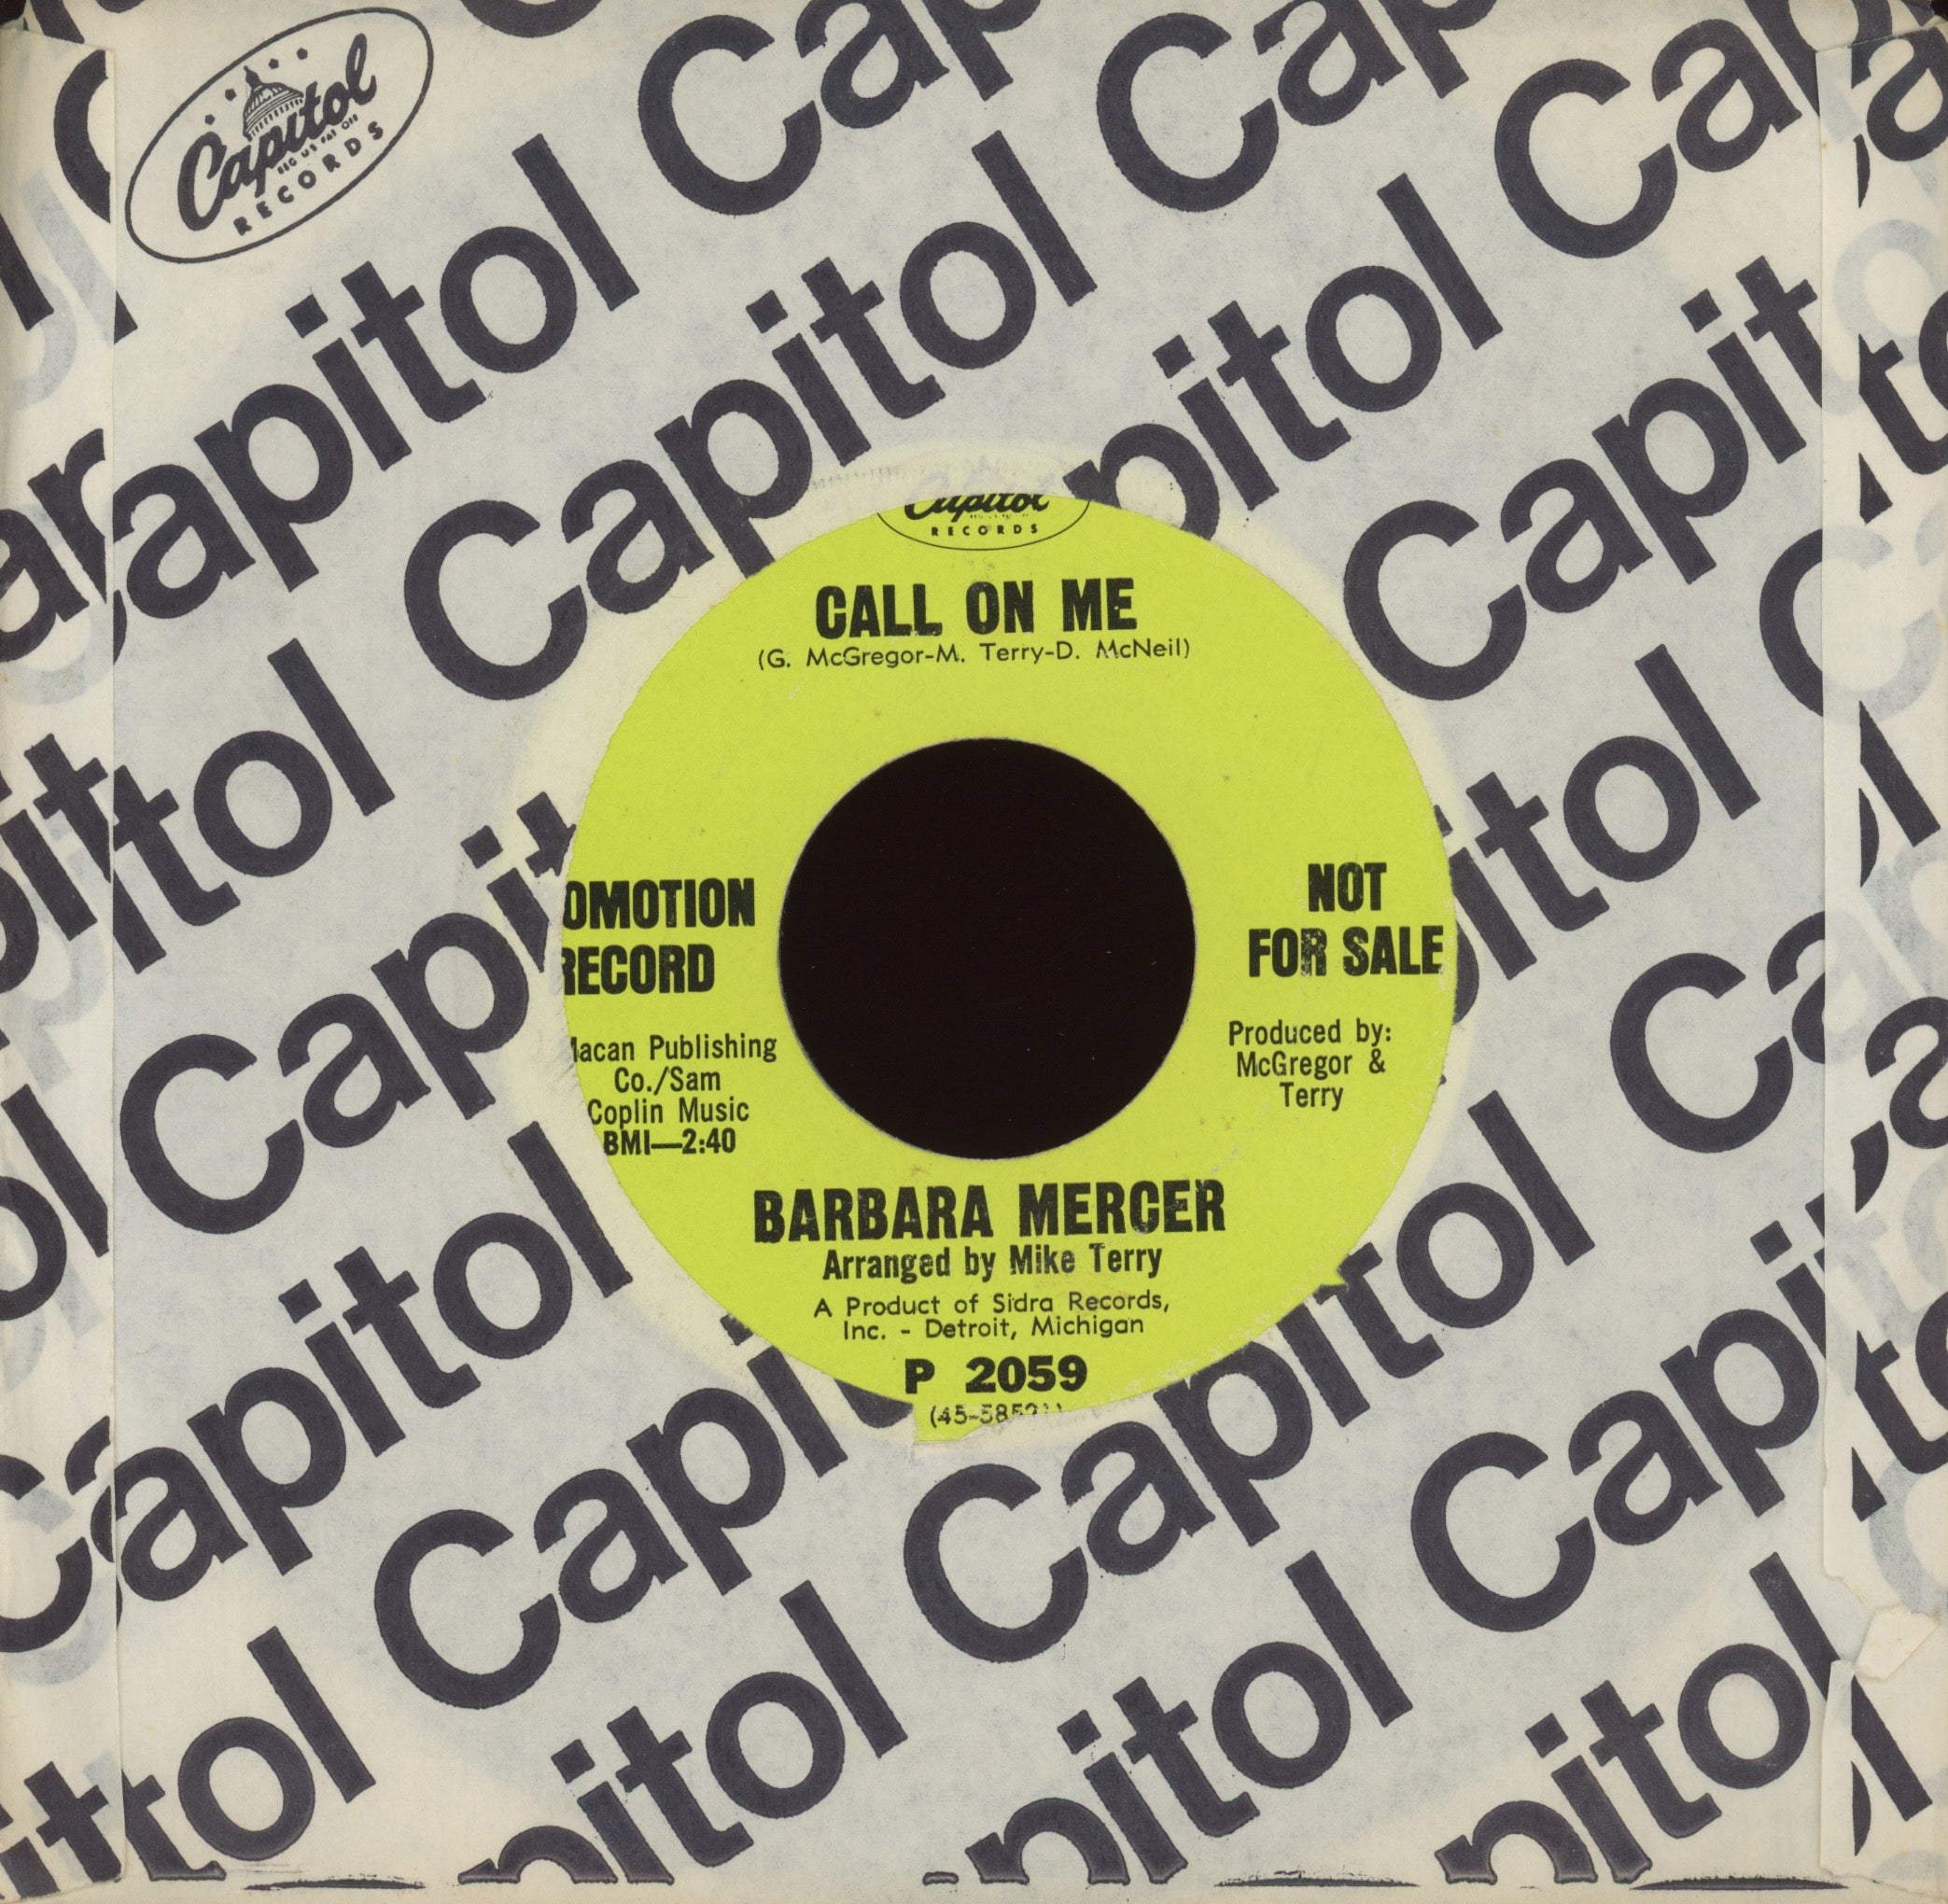 Barbara Mercer - So Real on Capitol Promo Northern Soul 45